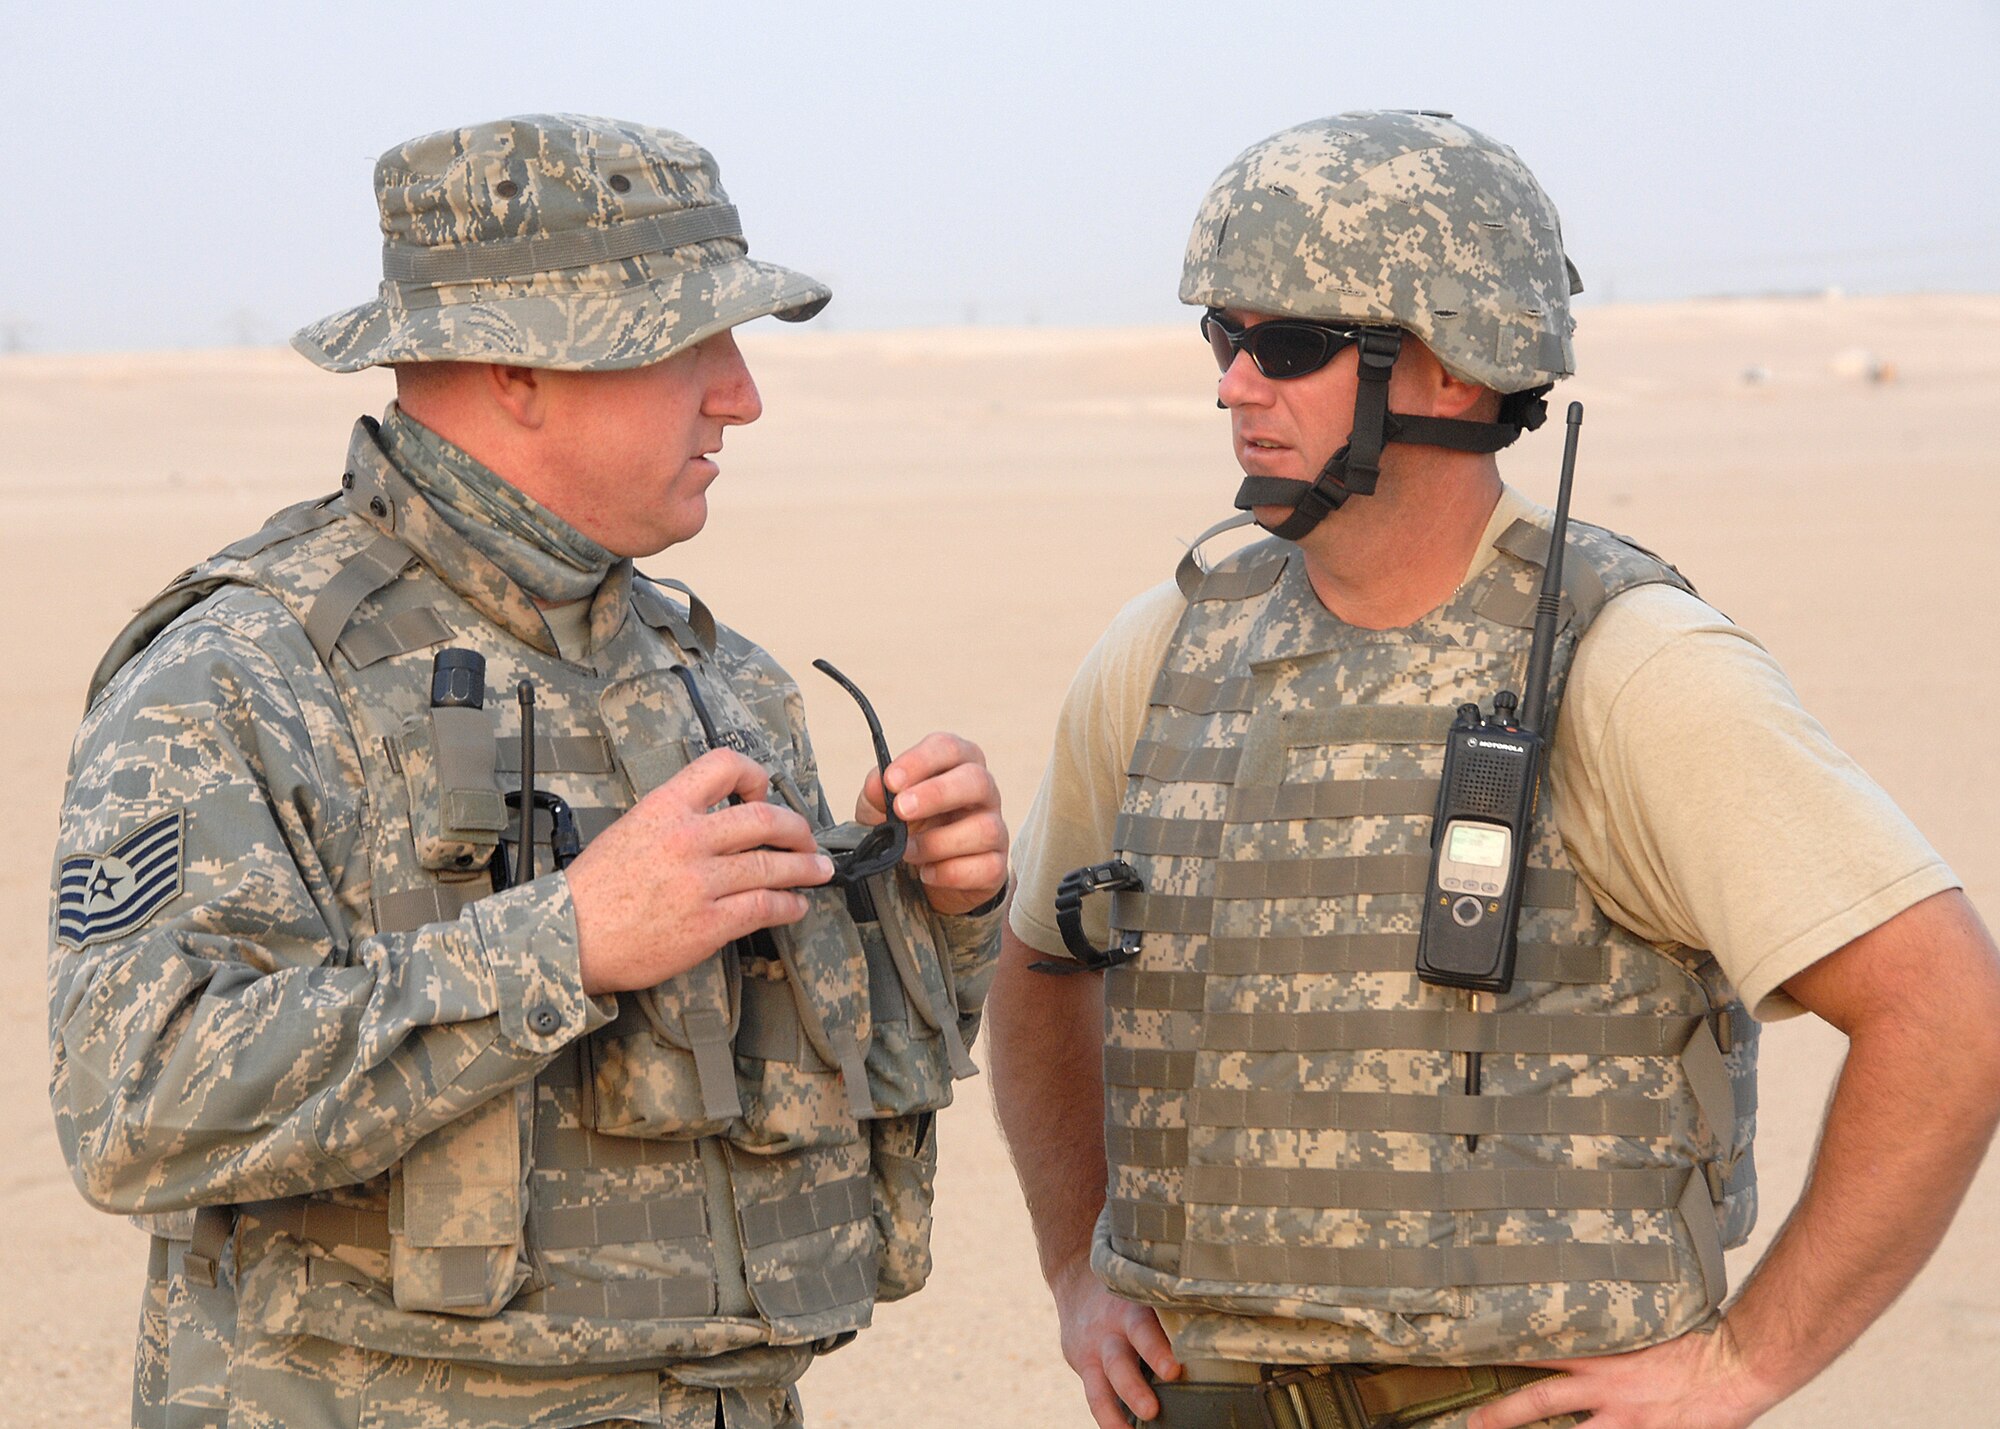 SOUTHWEST ASIA -- Tech. Sgt. Brent Stiefel, 386th Expeditionary Security Forces Squadron Viper team leader, left, talks to Tech. Sgt. Peter McNally, 386th Expeditionary Civil Engineer Squadron Explosive Ordinance Disposal team, about the procedures for disposing of unexploded ordnance on Oct. 22 at an air base in Southwest Asia. The Viper teams patrol the area outside of the base for UXO's and interact with the local population to ensure a relationship with the host nation remains strong. Sergeant Stiefel is deployed from Kadena Air Base, Japan. Sergeant McNally is deployed from Tyndall Air Force Base, Fla. (U.S. Air Force photo/Tech. Sgt. Raheem Moore)